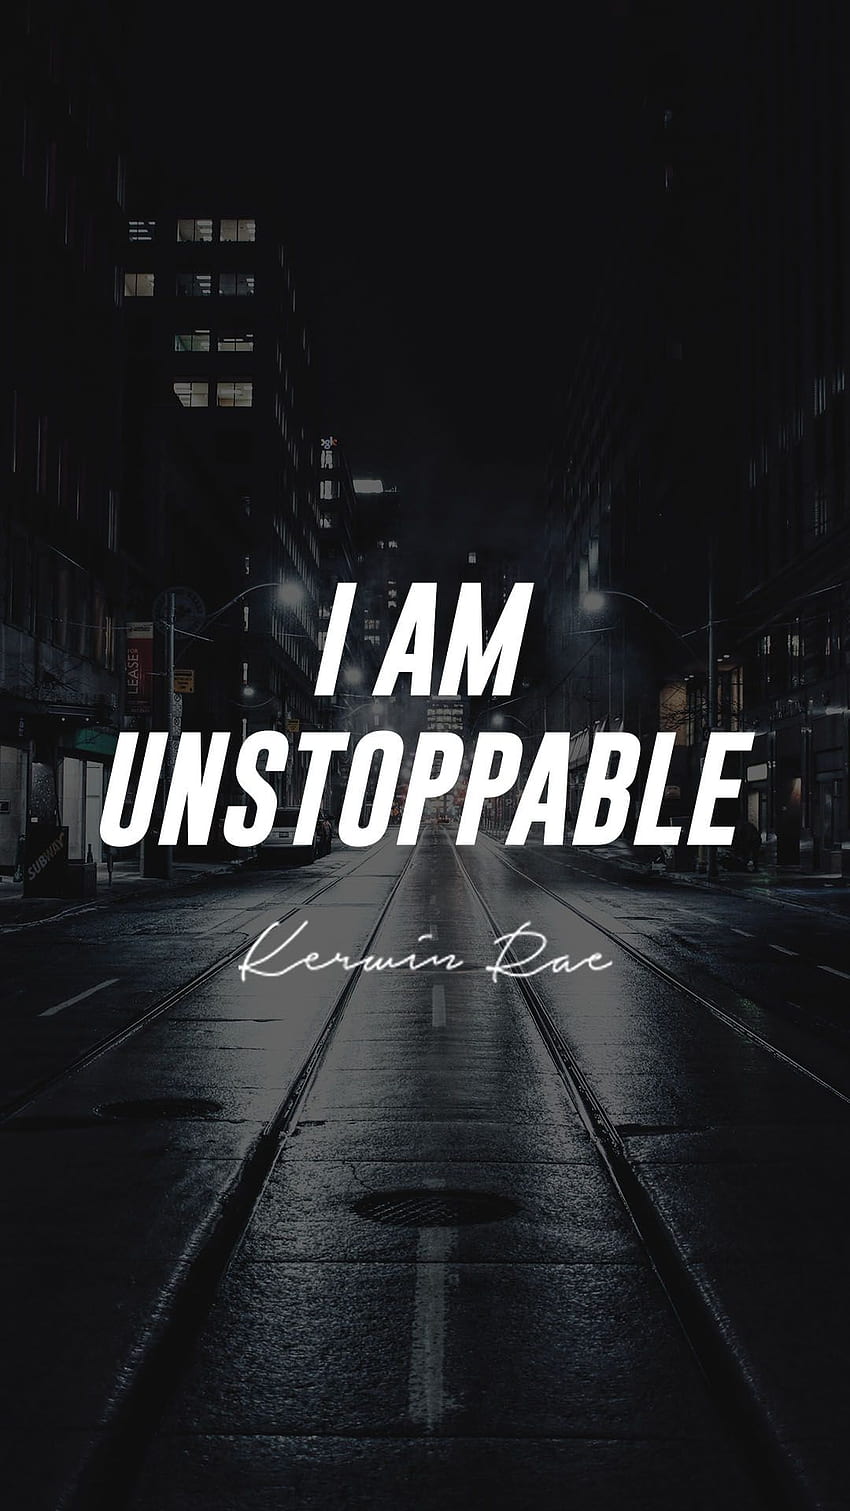 I am unstoppable - Kerwin Rae. Instagram , and video, Instagram HD phone wallpaper